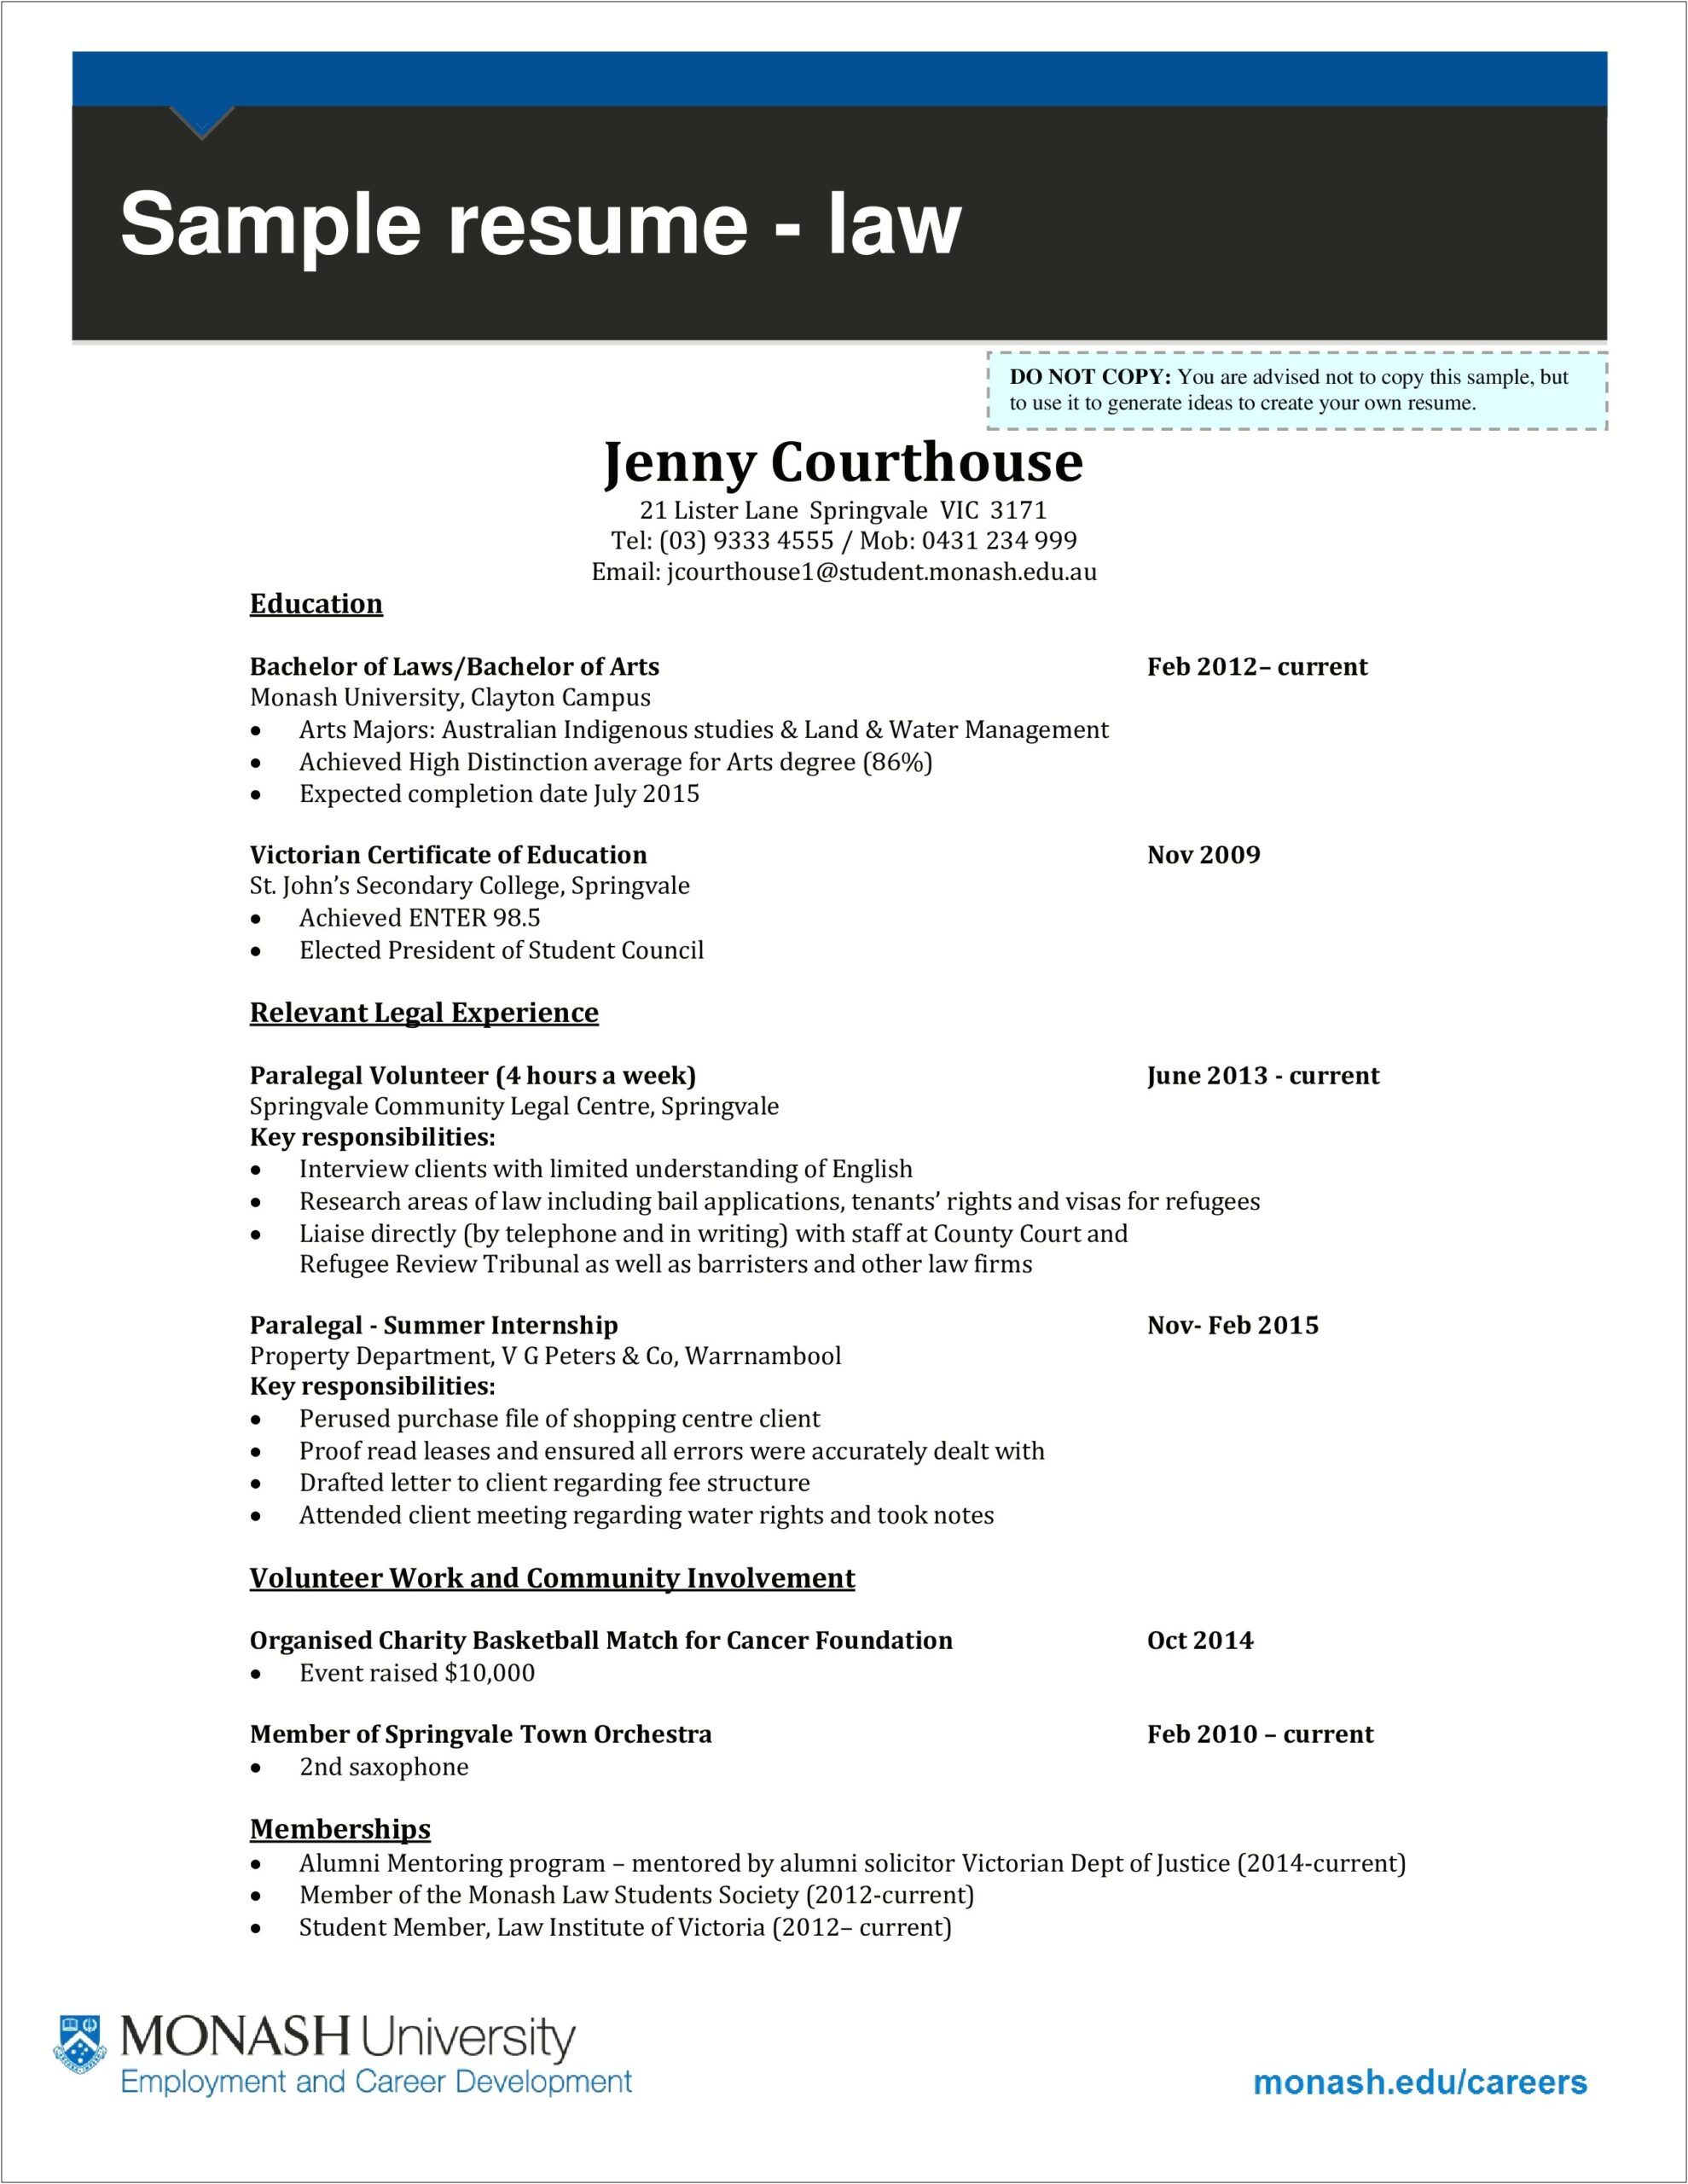 Law Student Resume Skills Section